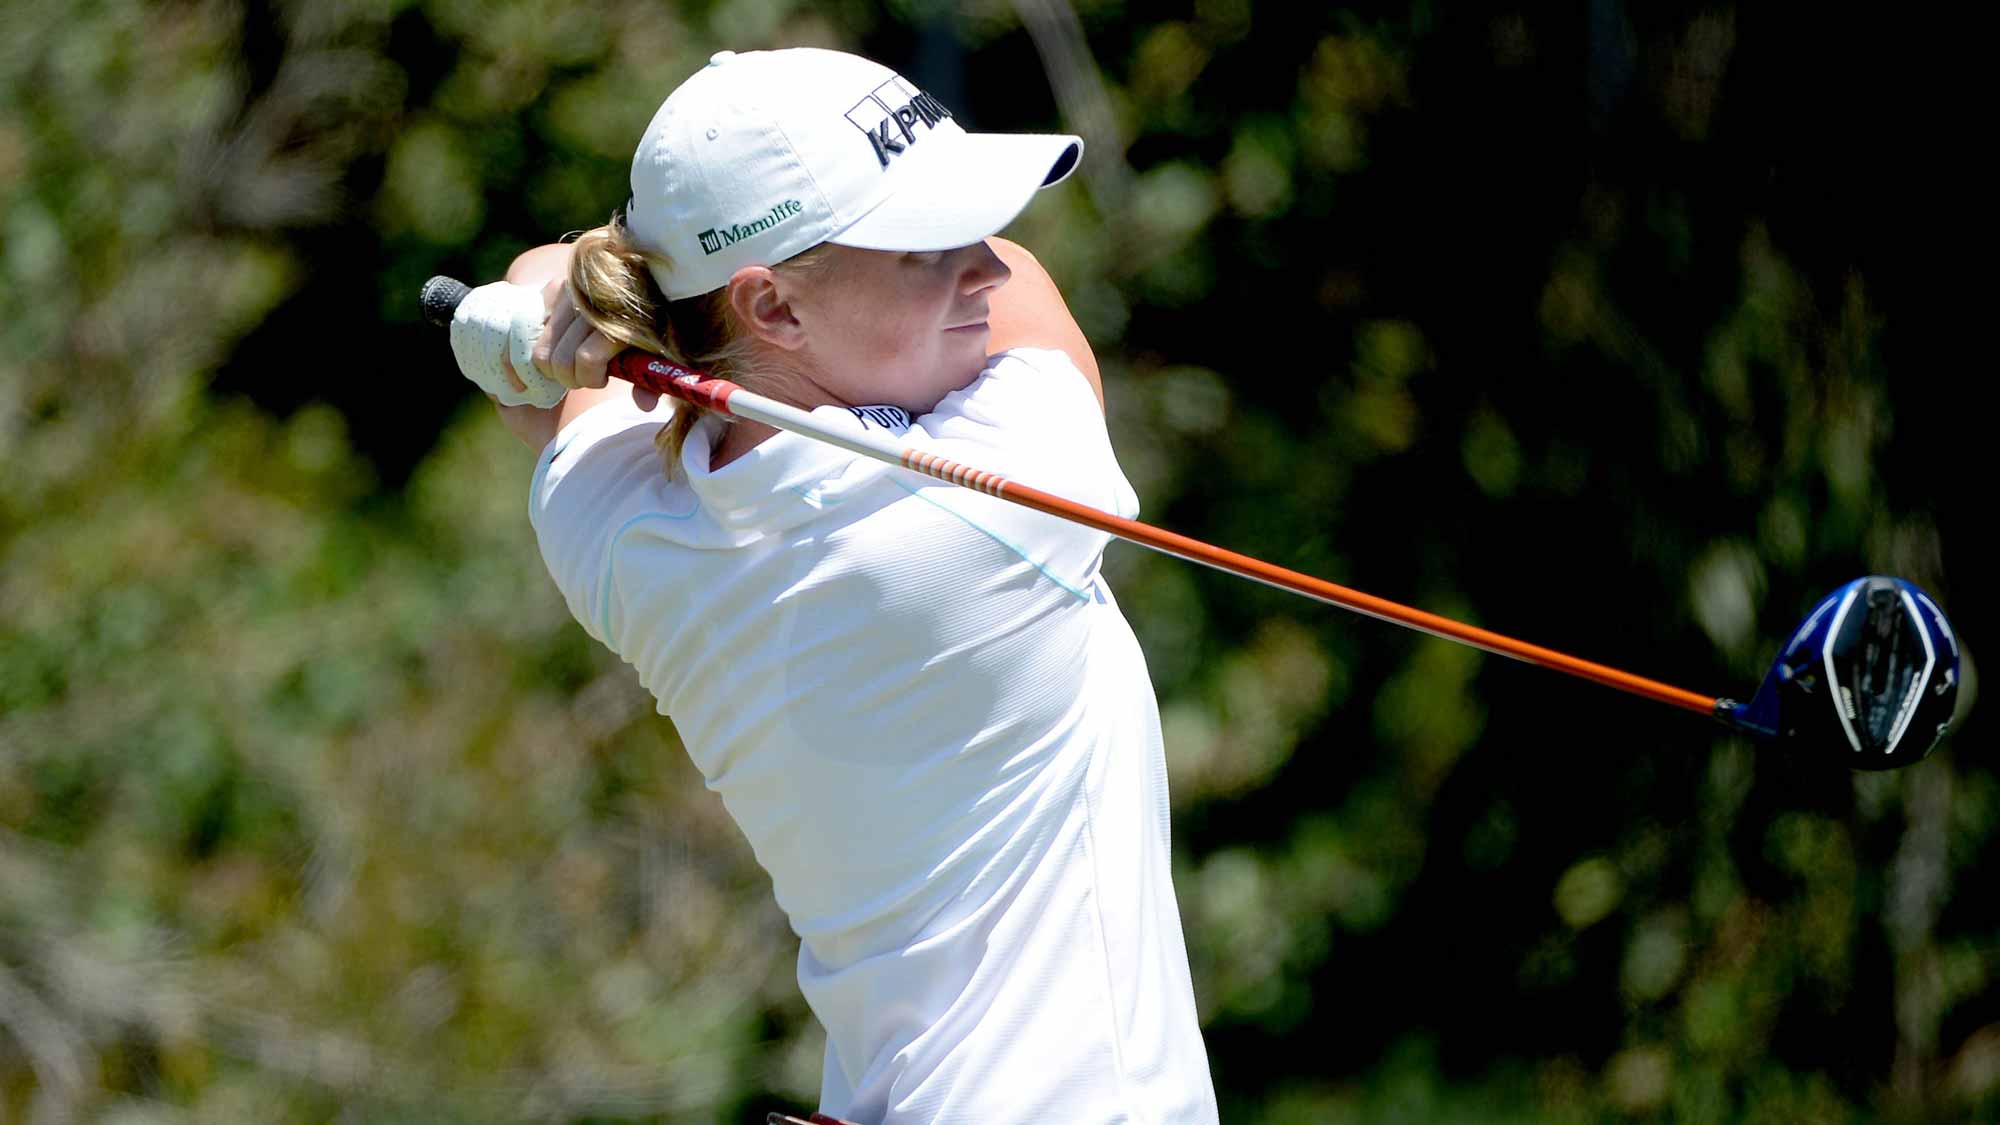 Stacy Lewis tees off the 9th hole during Round Two of the LPGA KIA Classic at the Aviara Golf Club